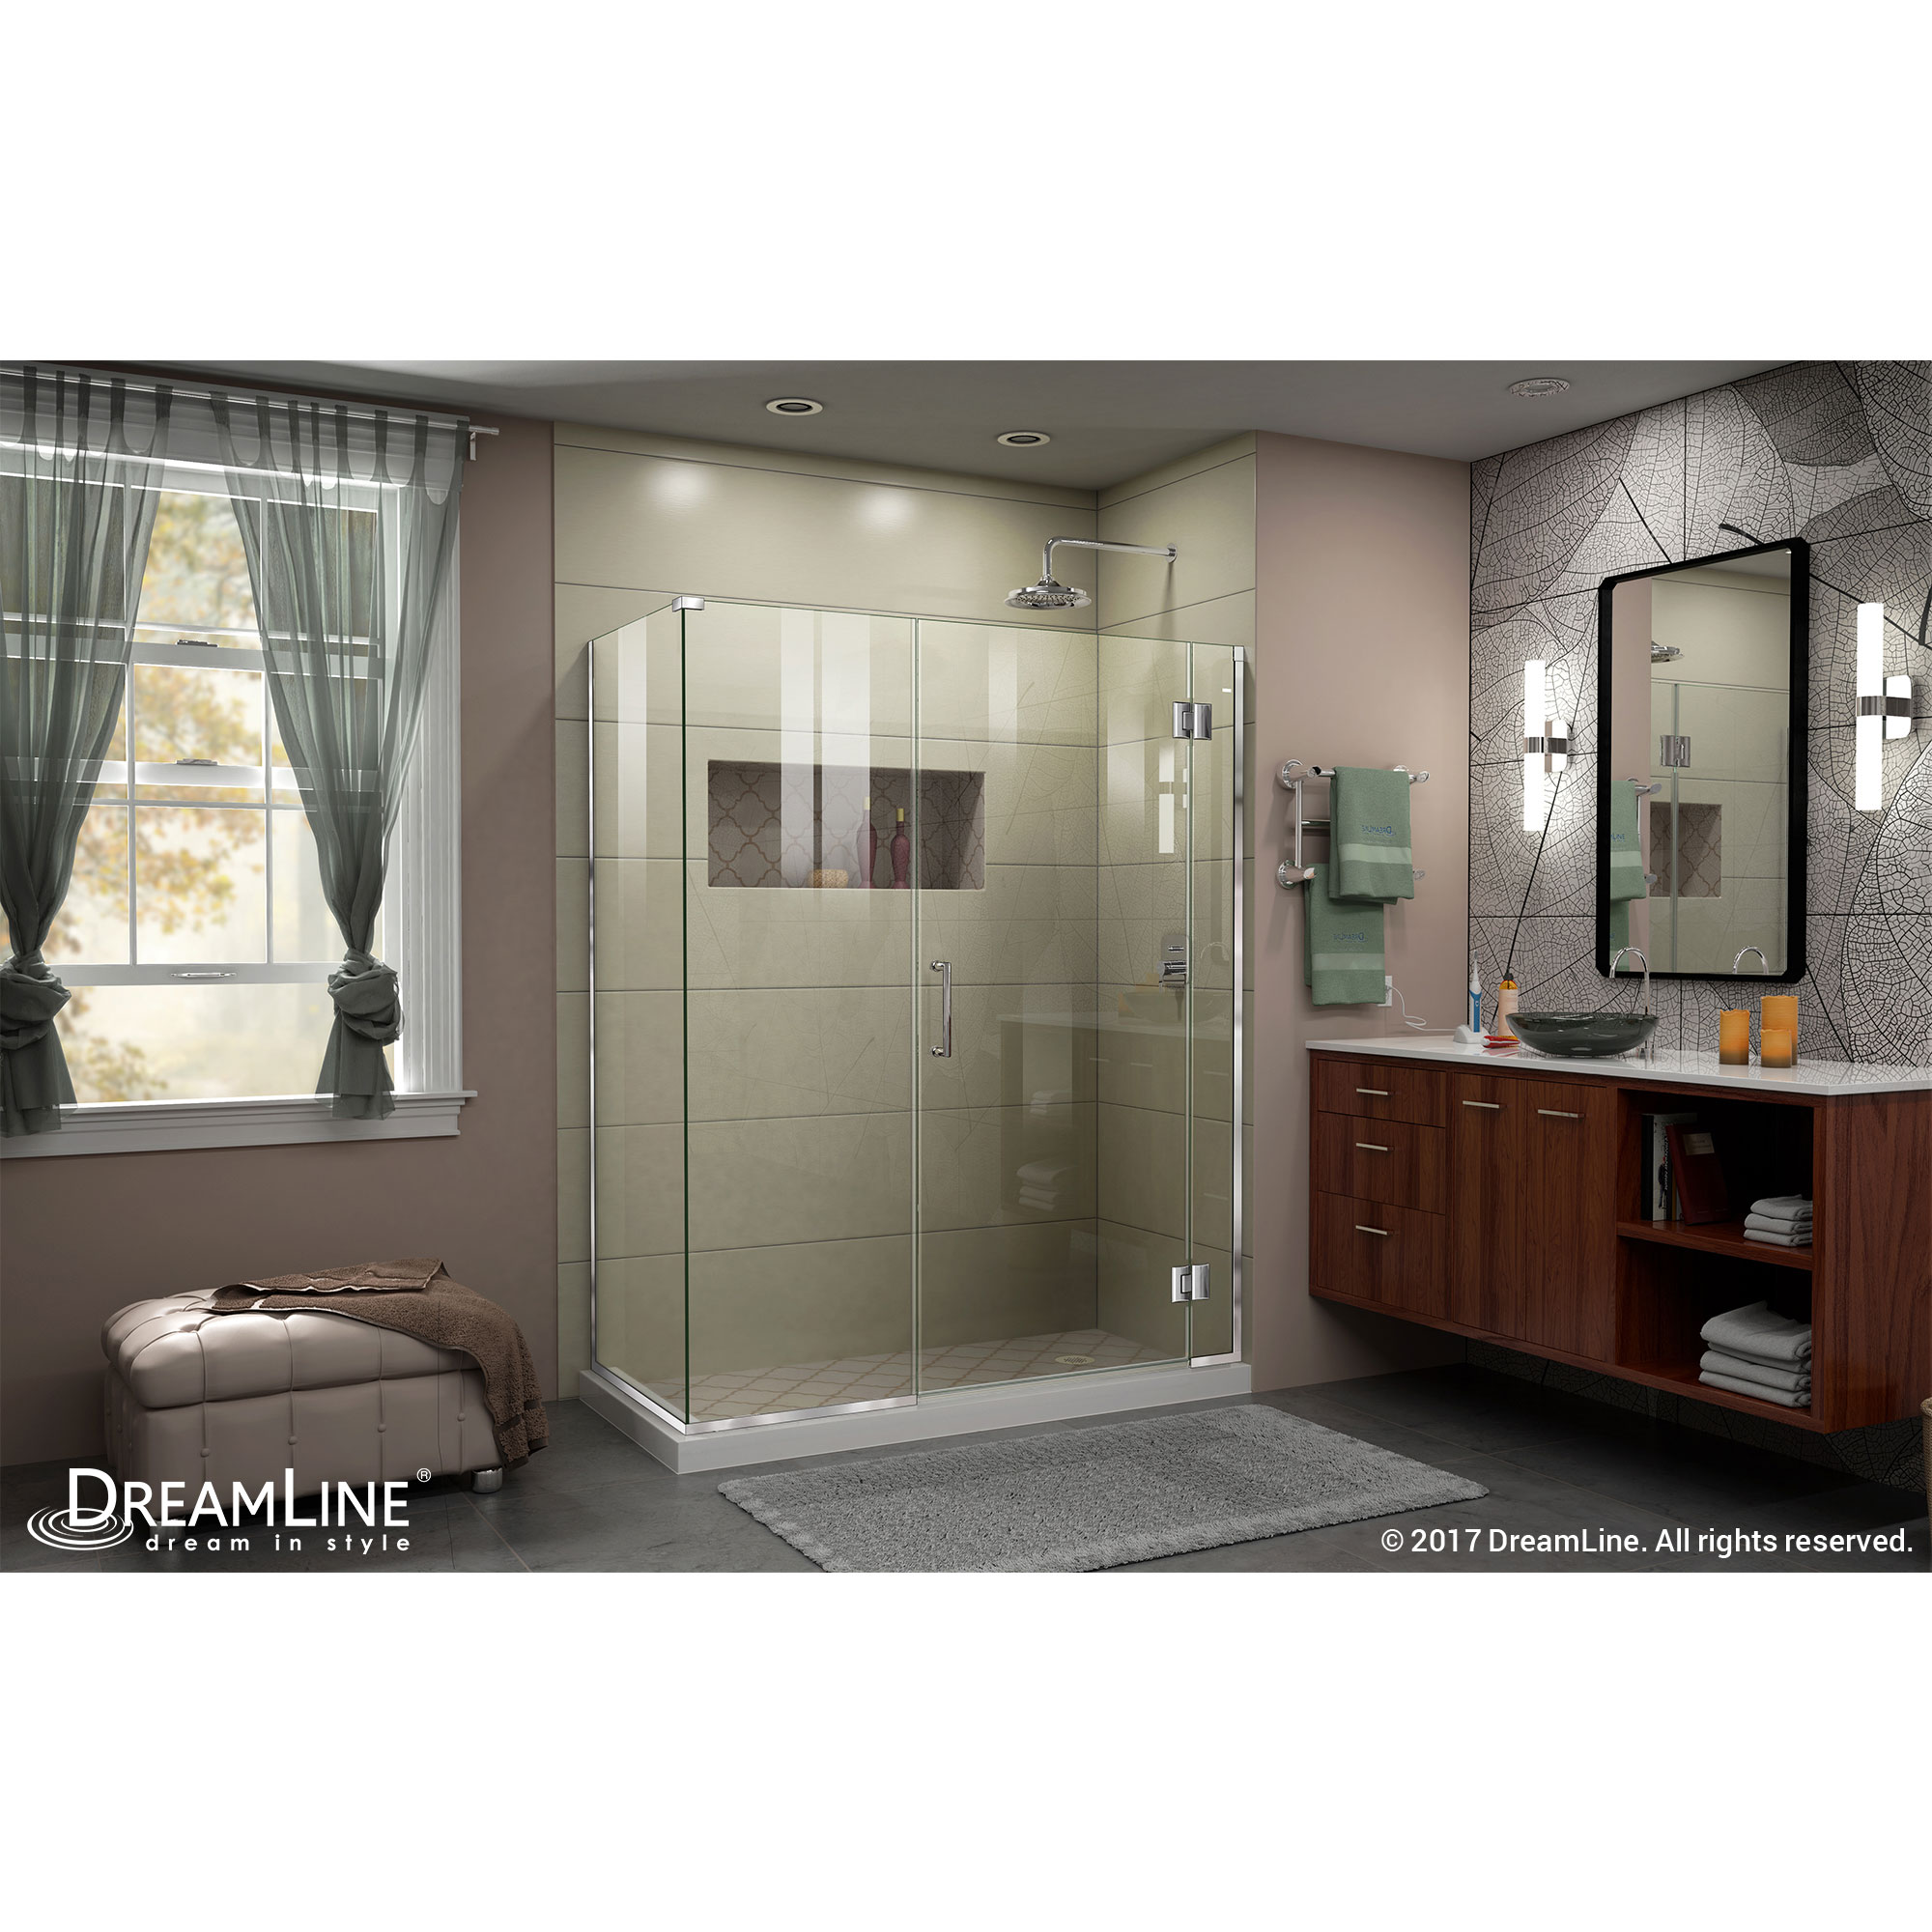 DreamLine Unidoor-X 59 in. W x 34 3/8 in. D x 72 in. H Hinged Shower Enclosure in Chrome